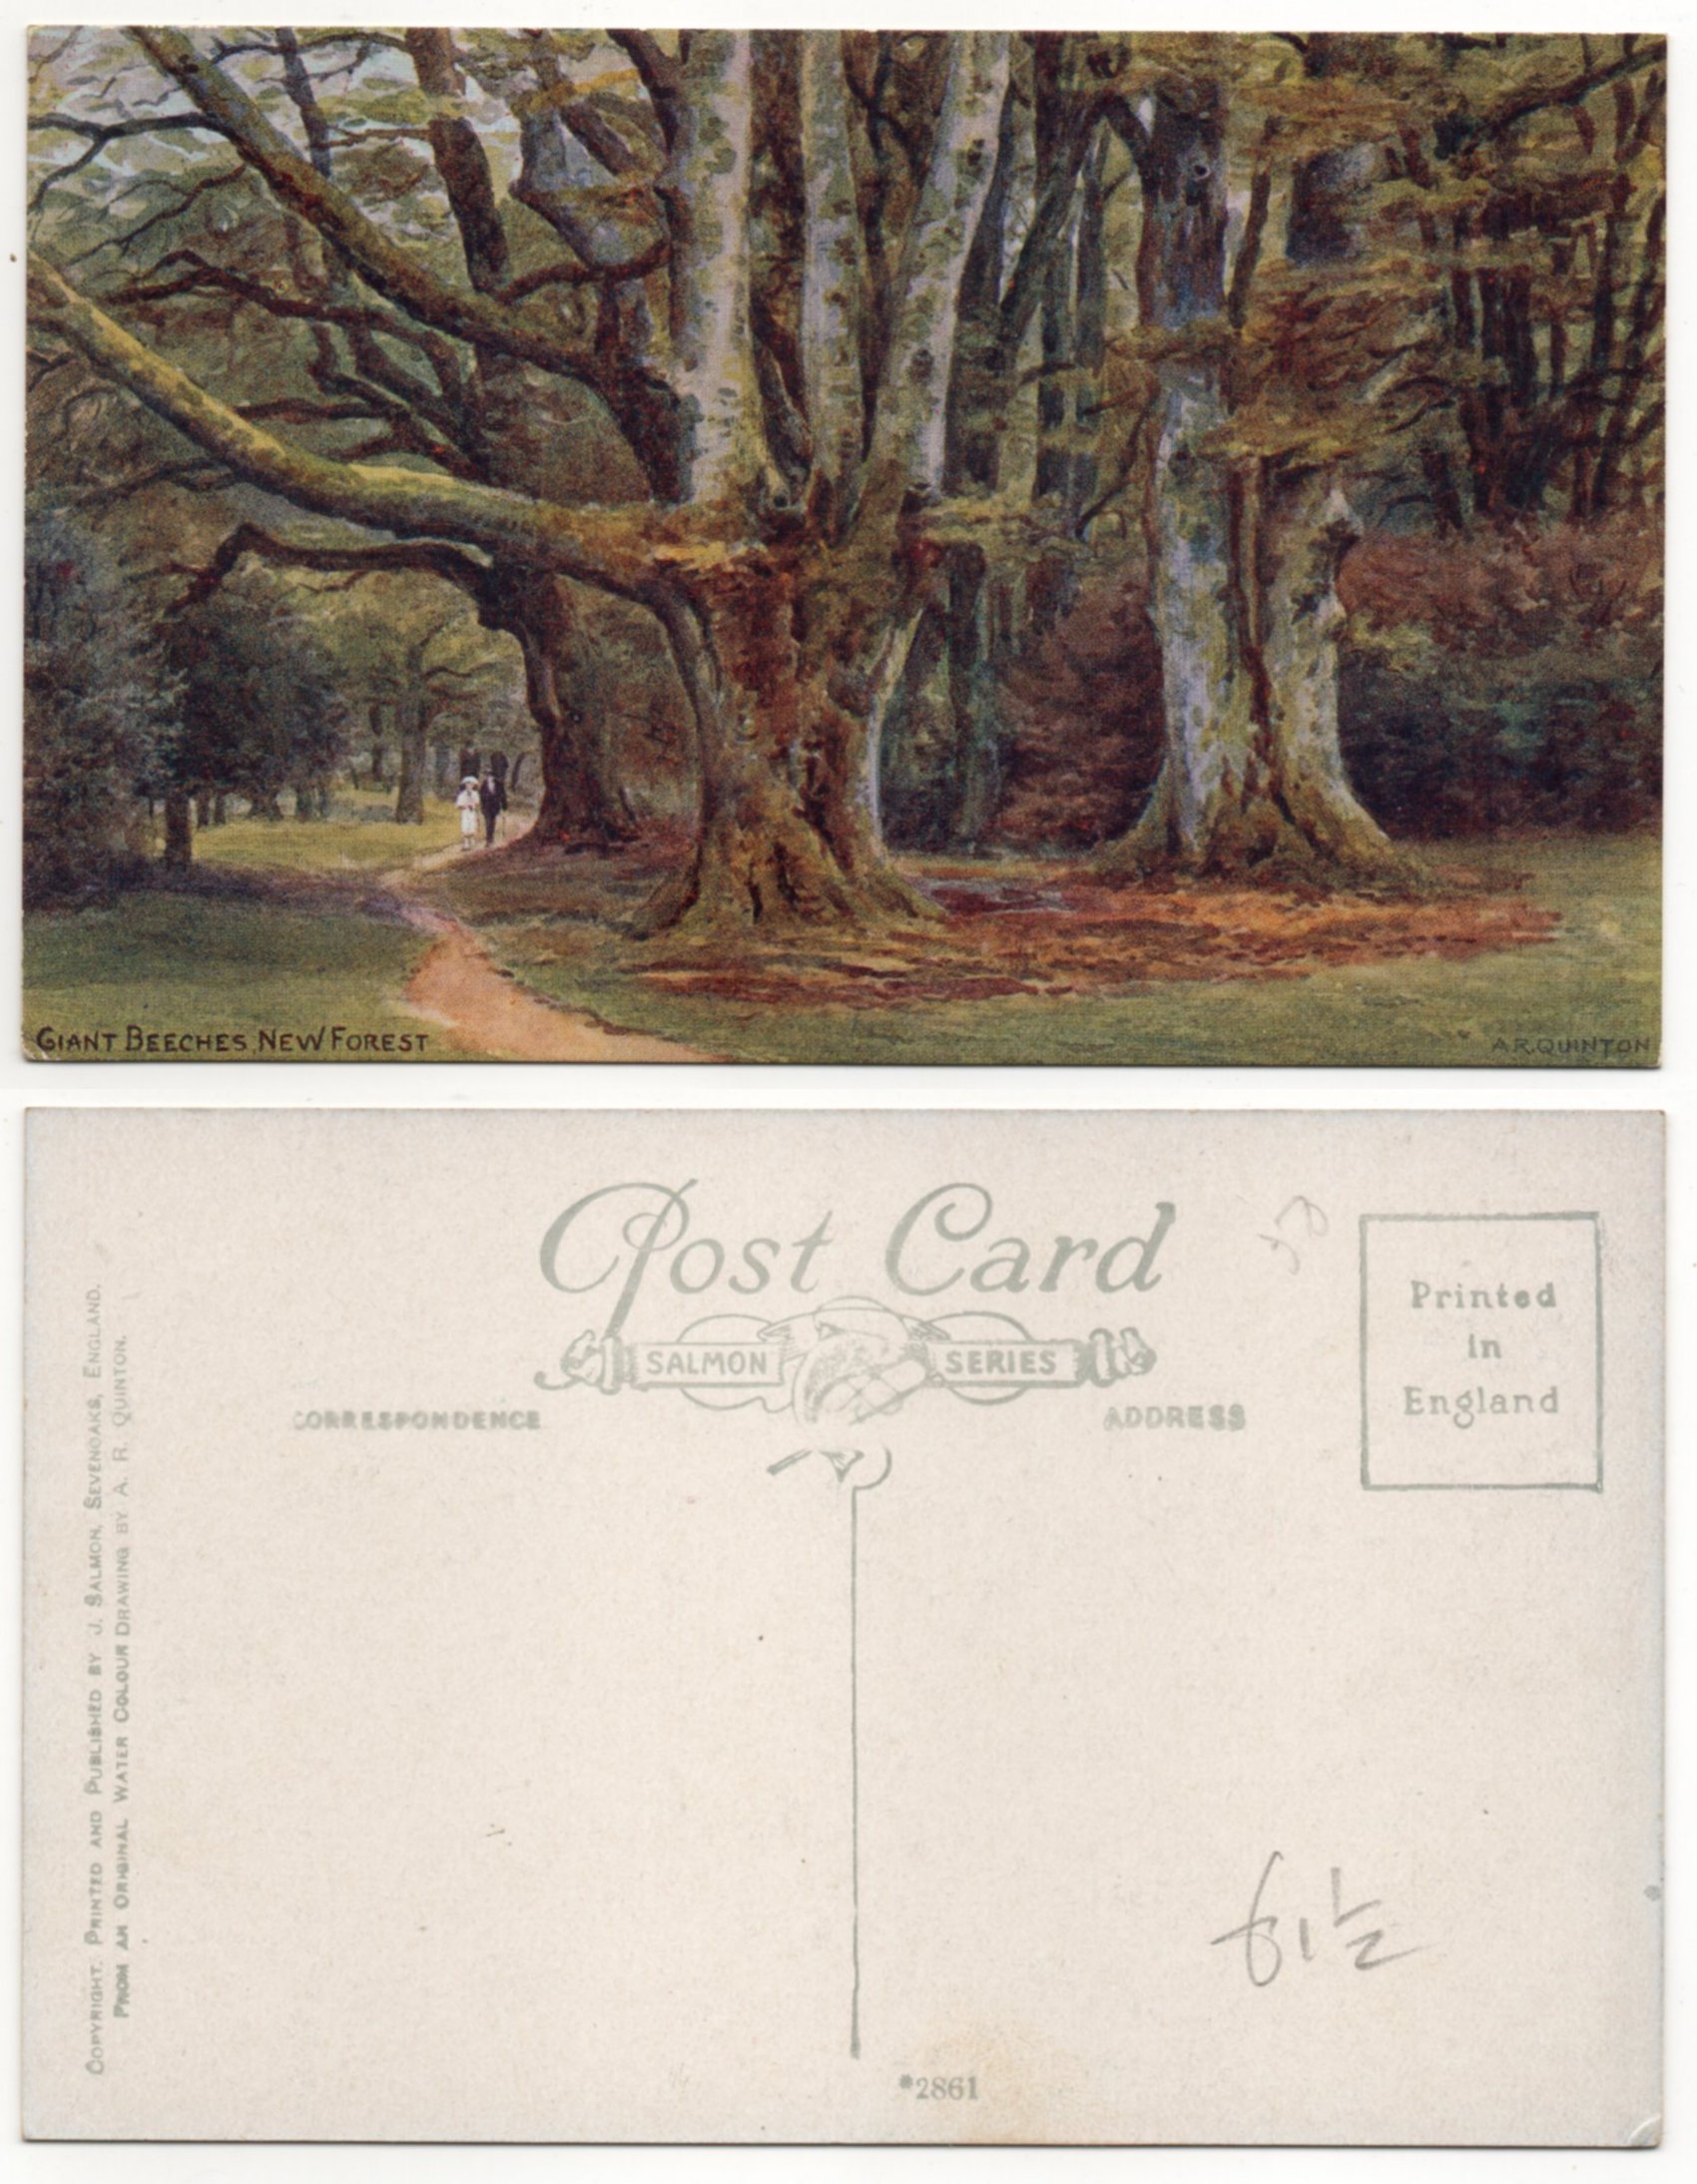 Giant Beeches New Forest PW0815.jpg  by whitetaylor